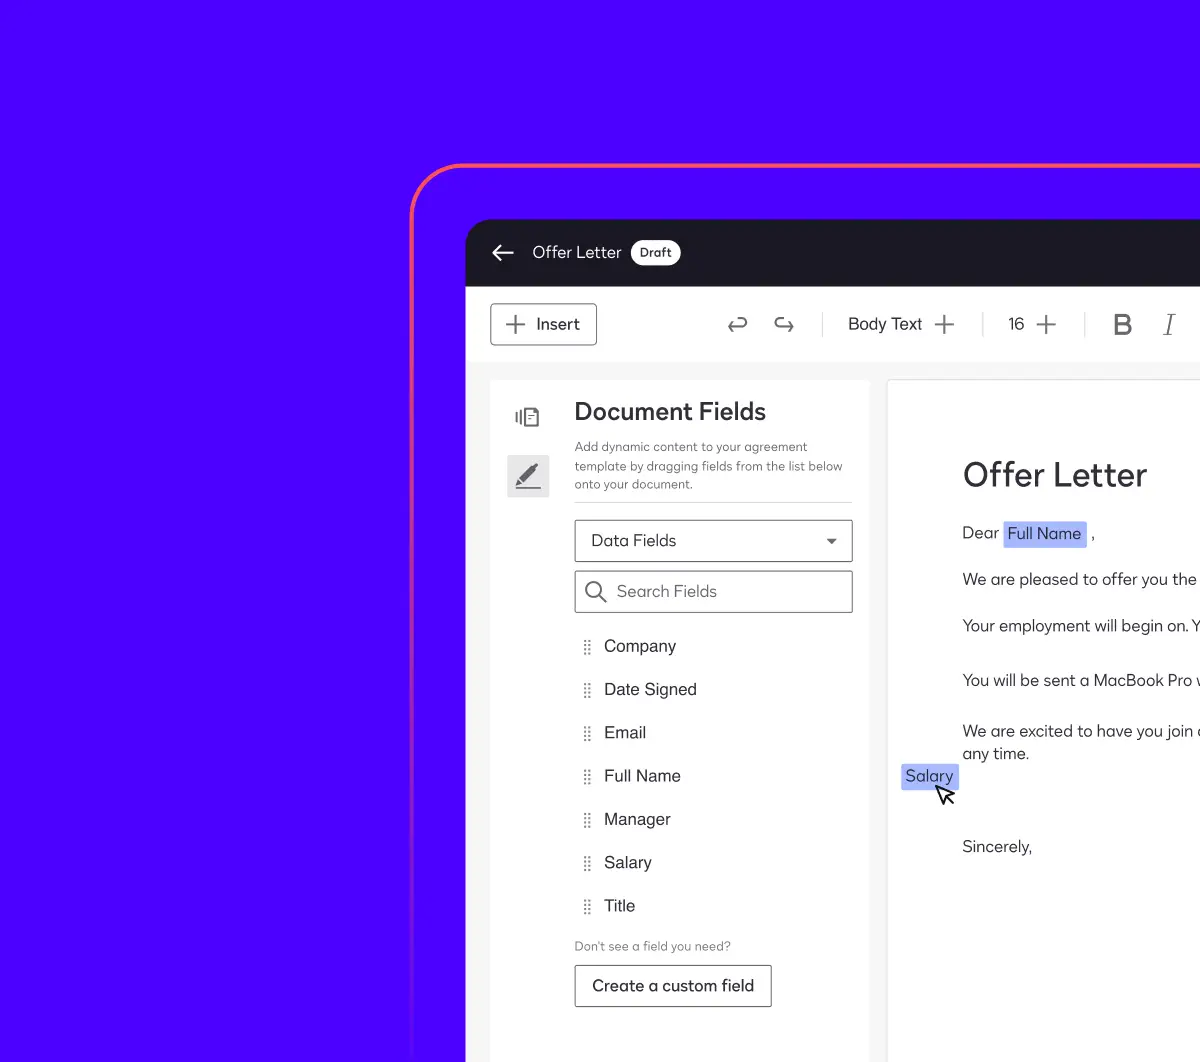 A screen in Docusign Document Generation shows the fields a user can add to an offer letter document, including company, date signed, email, full name, and more